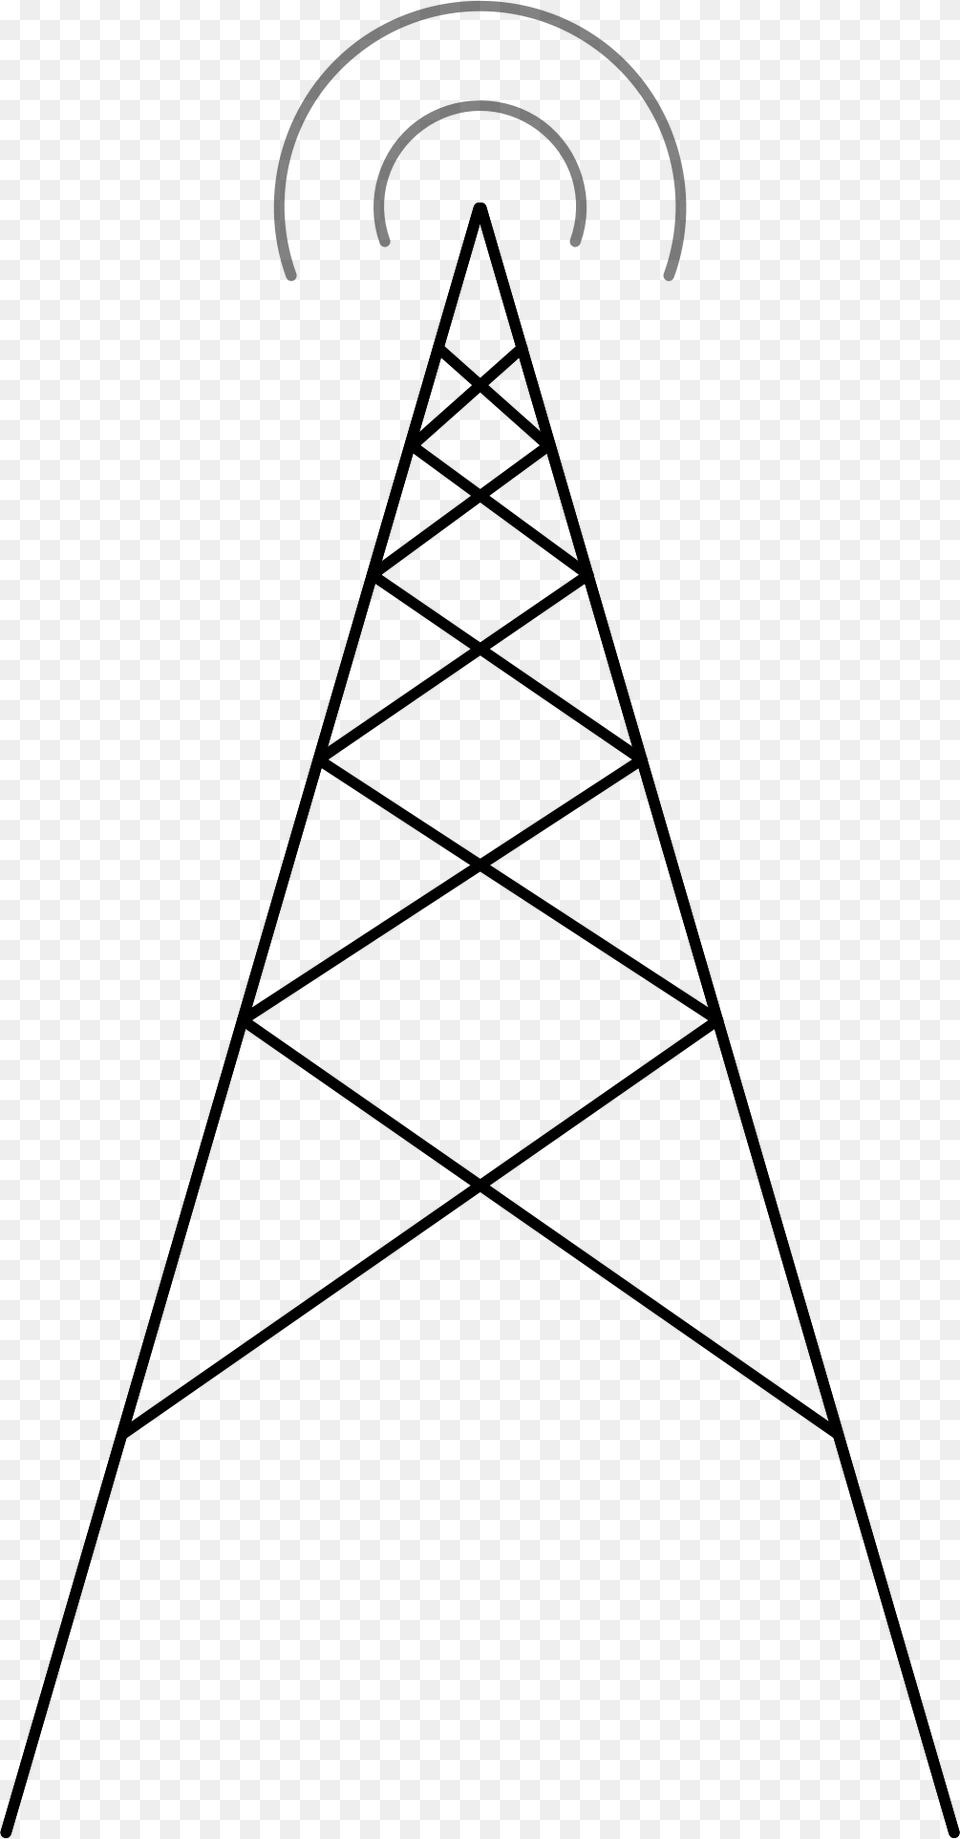 Antenna For Designing Projects Antenna, Gray Png